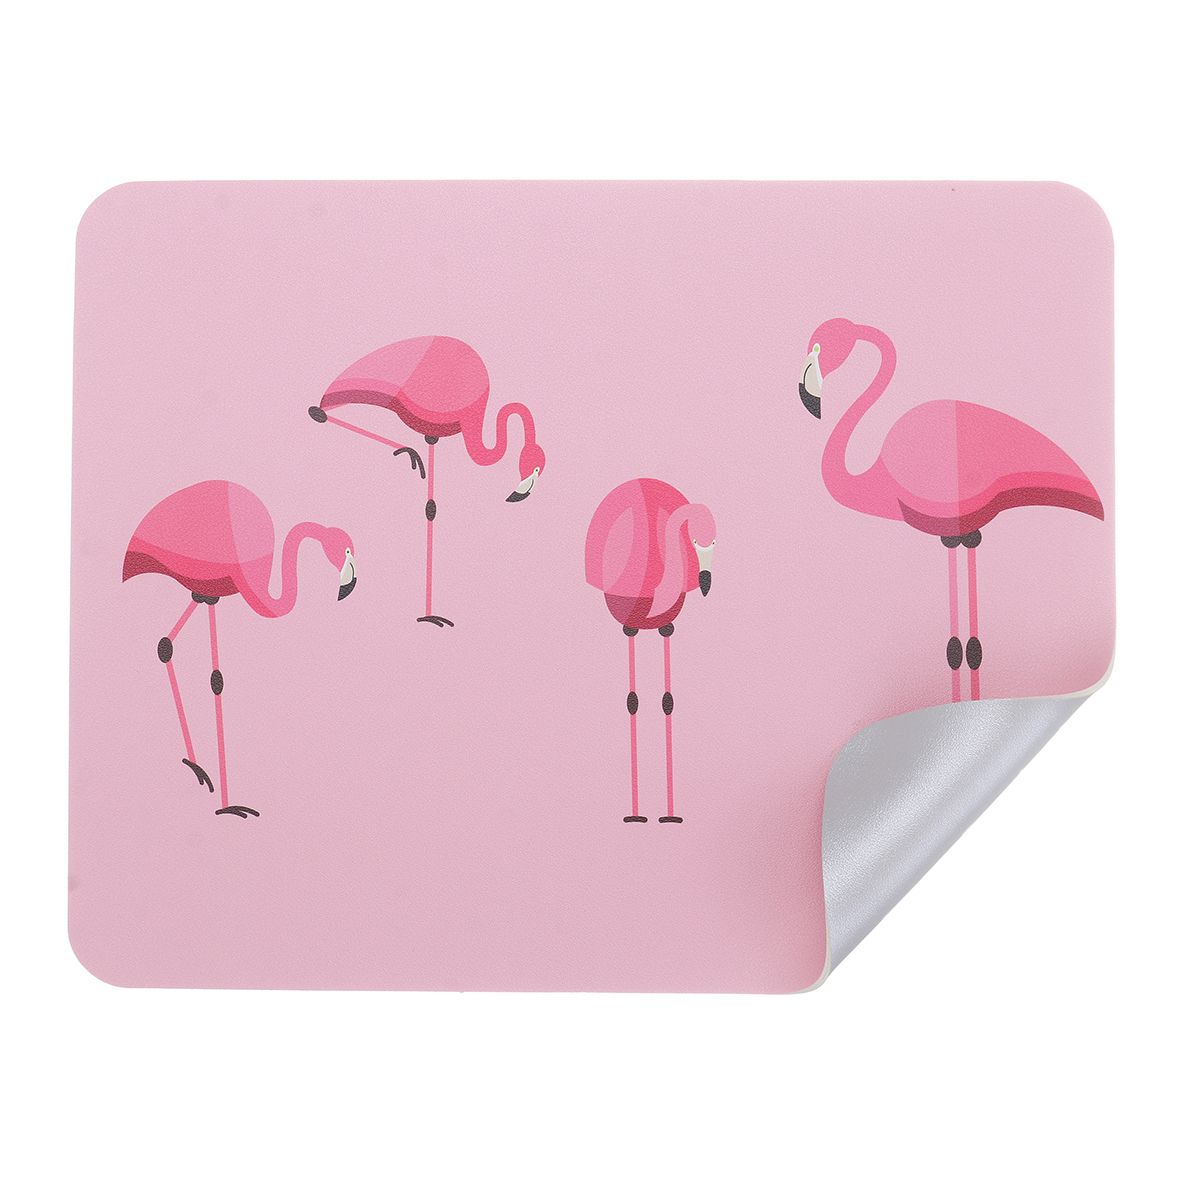 AtailorBird-270--210--2mm-PU-Leather-Protective-Desk-Pad-Waterproof-Non-Slip-Writing-Double-Side-Gam-1633296